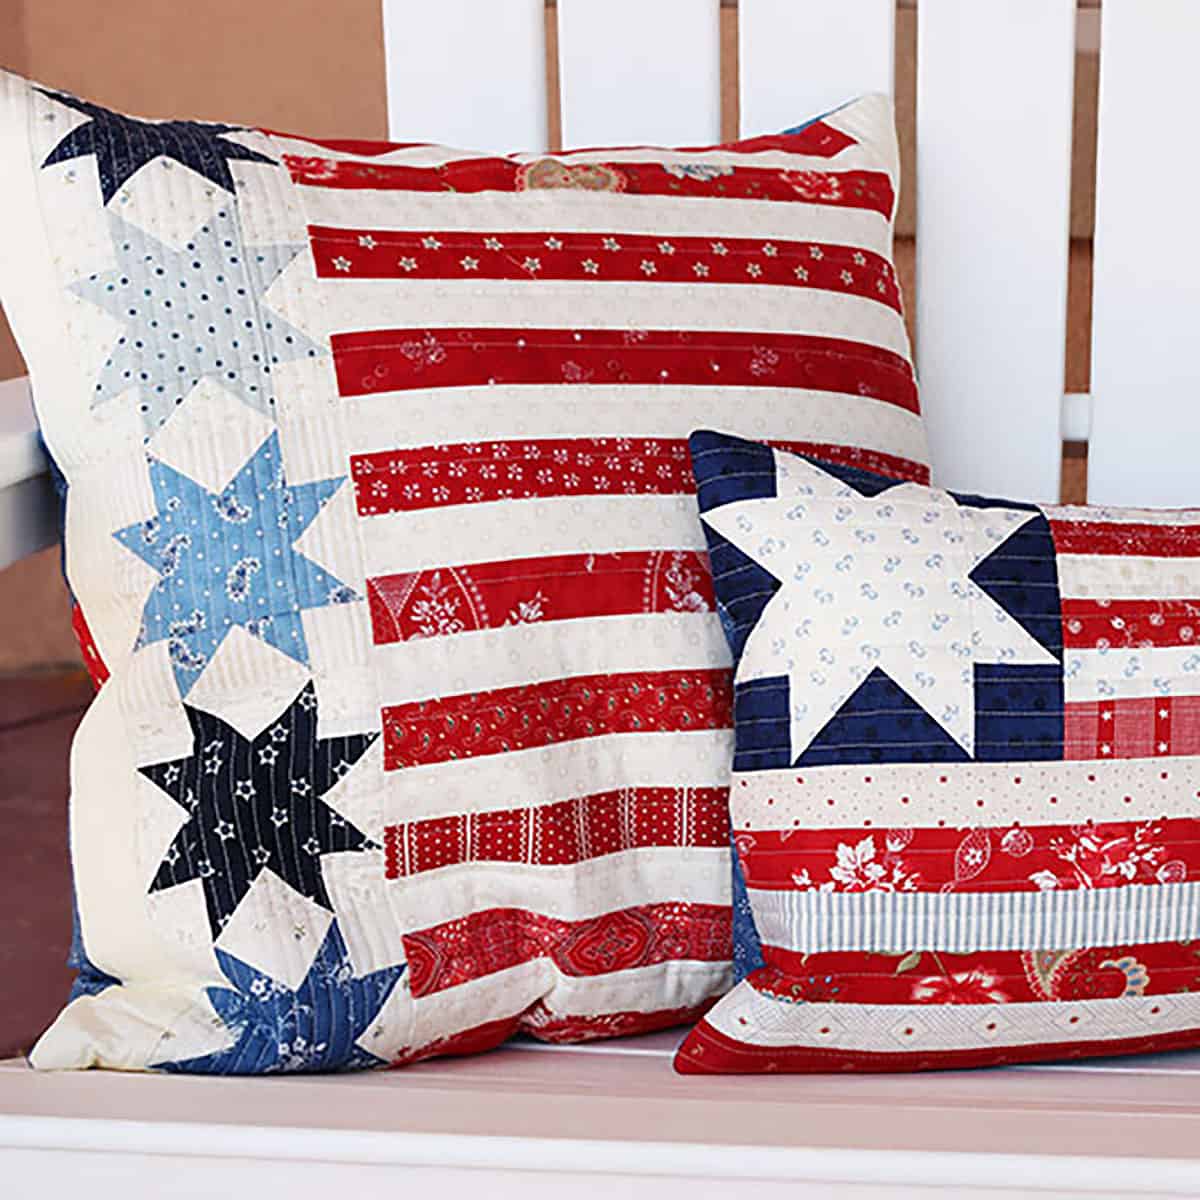 Patriotic quilted pillows 